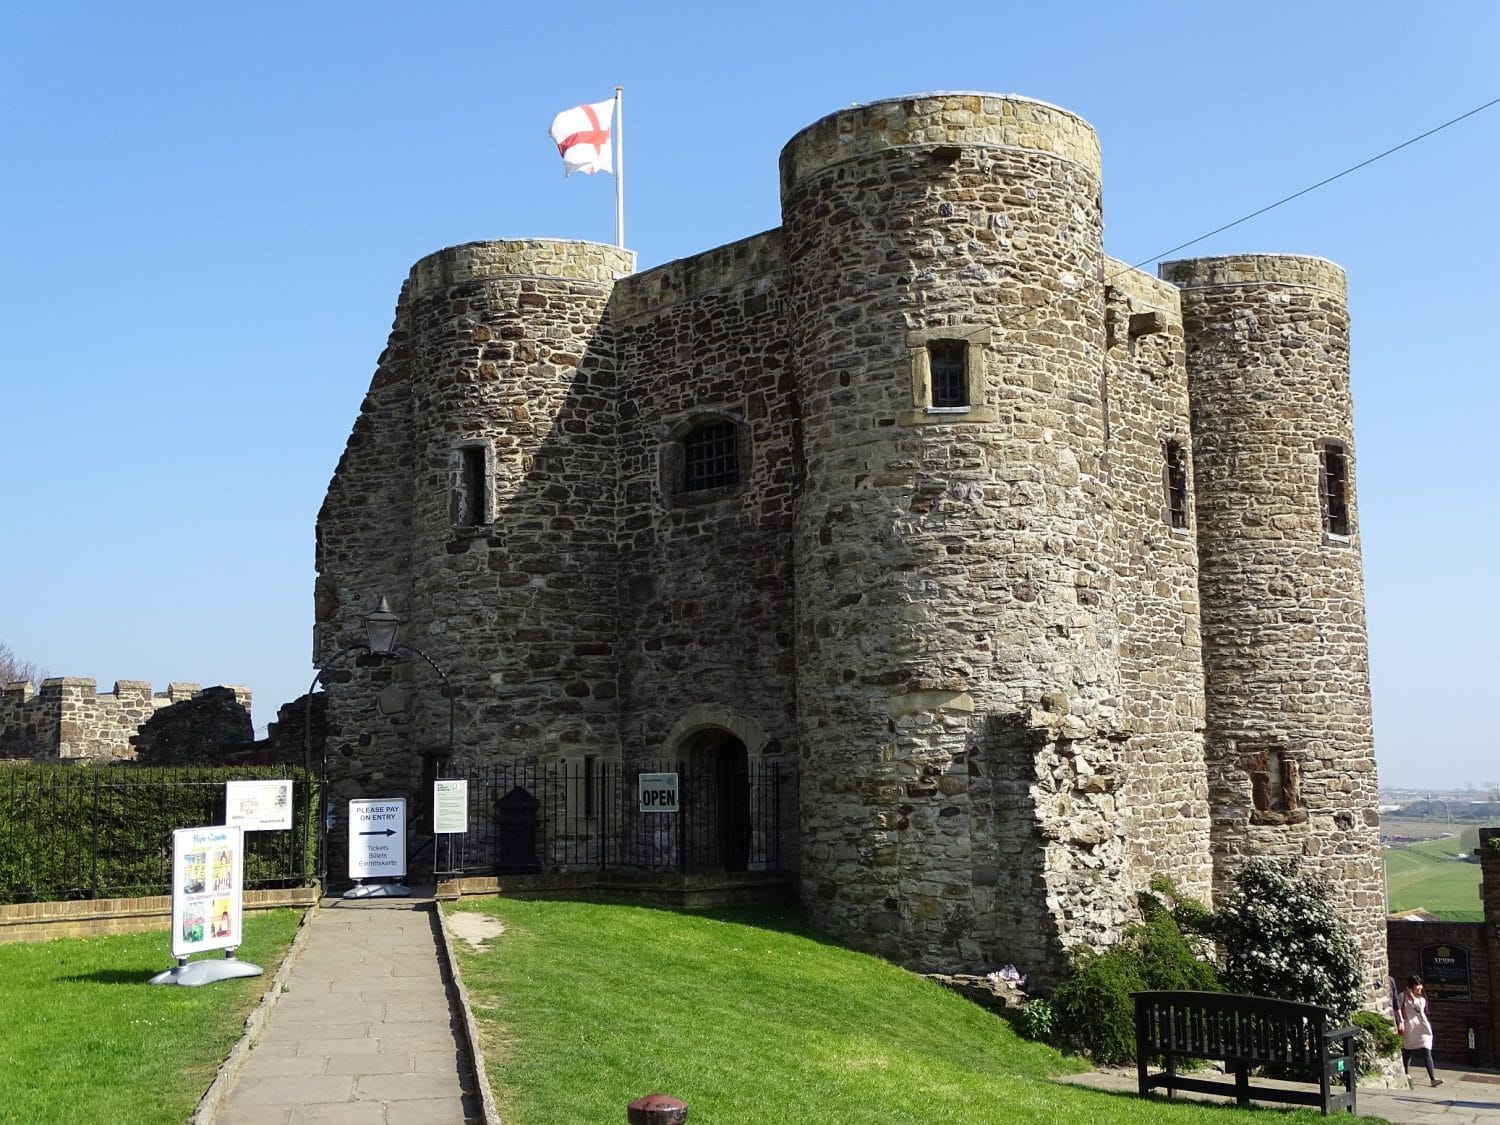 Visit Rye Museum at the Ypres Tower